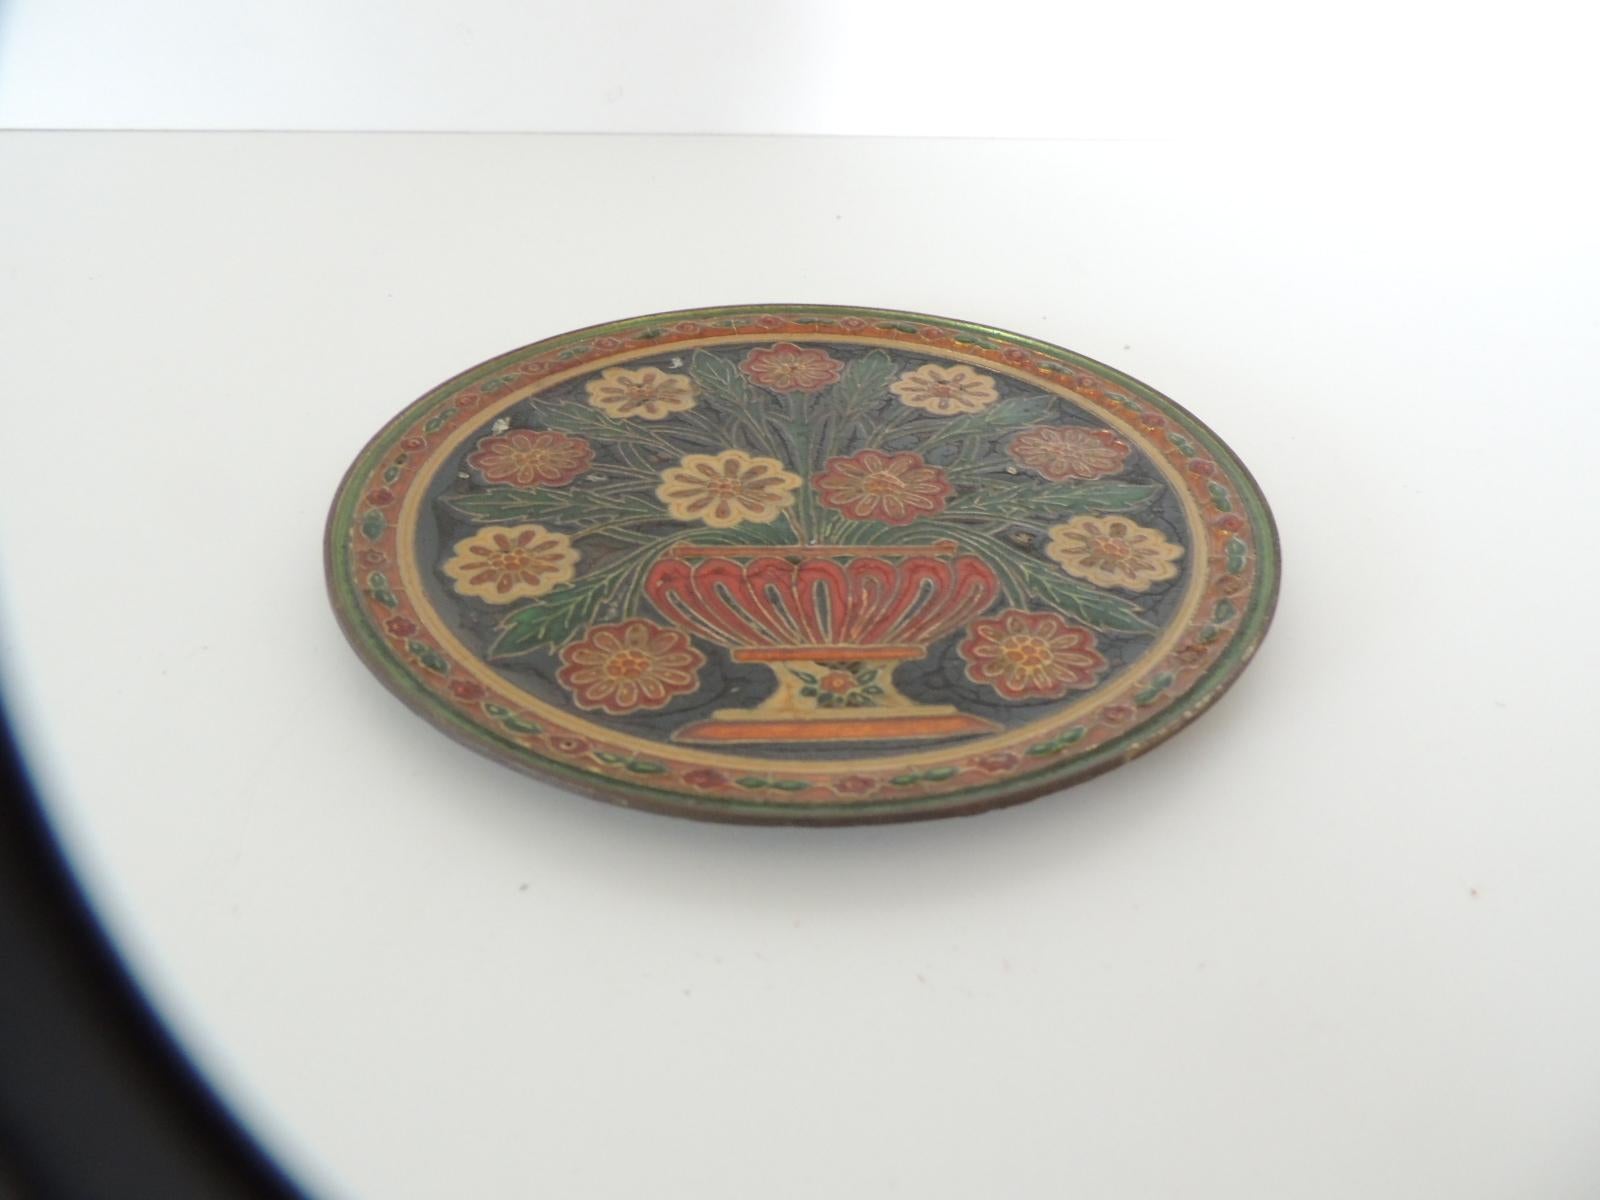 Small metal cloisonné hand painted decorative wall plate.
Depicting urn with blooming flowers in shades of red, yellow, green and black.
Hanging hook in the back.
Size: 6